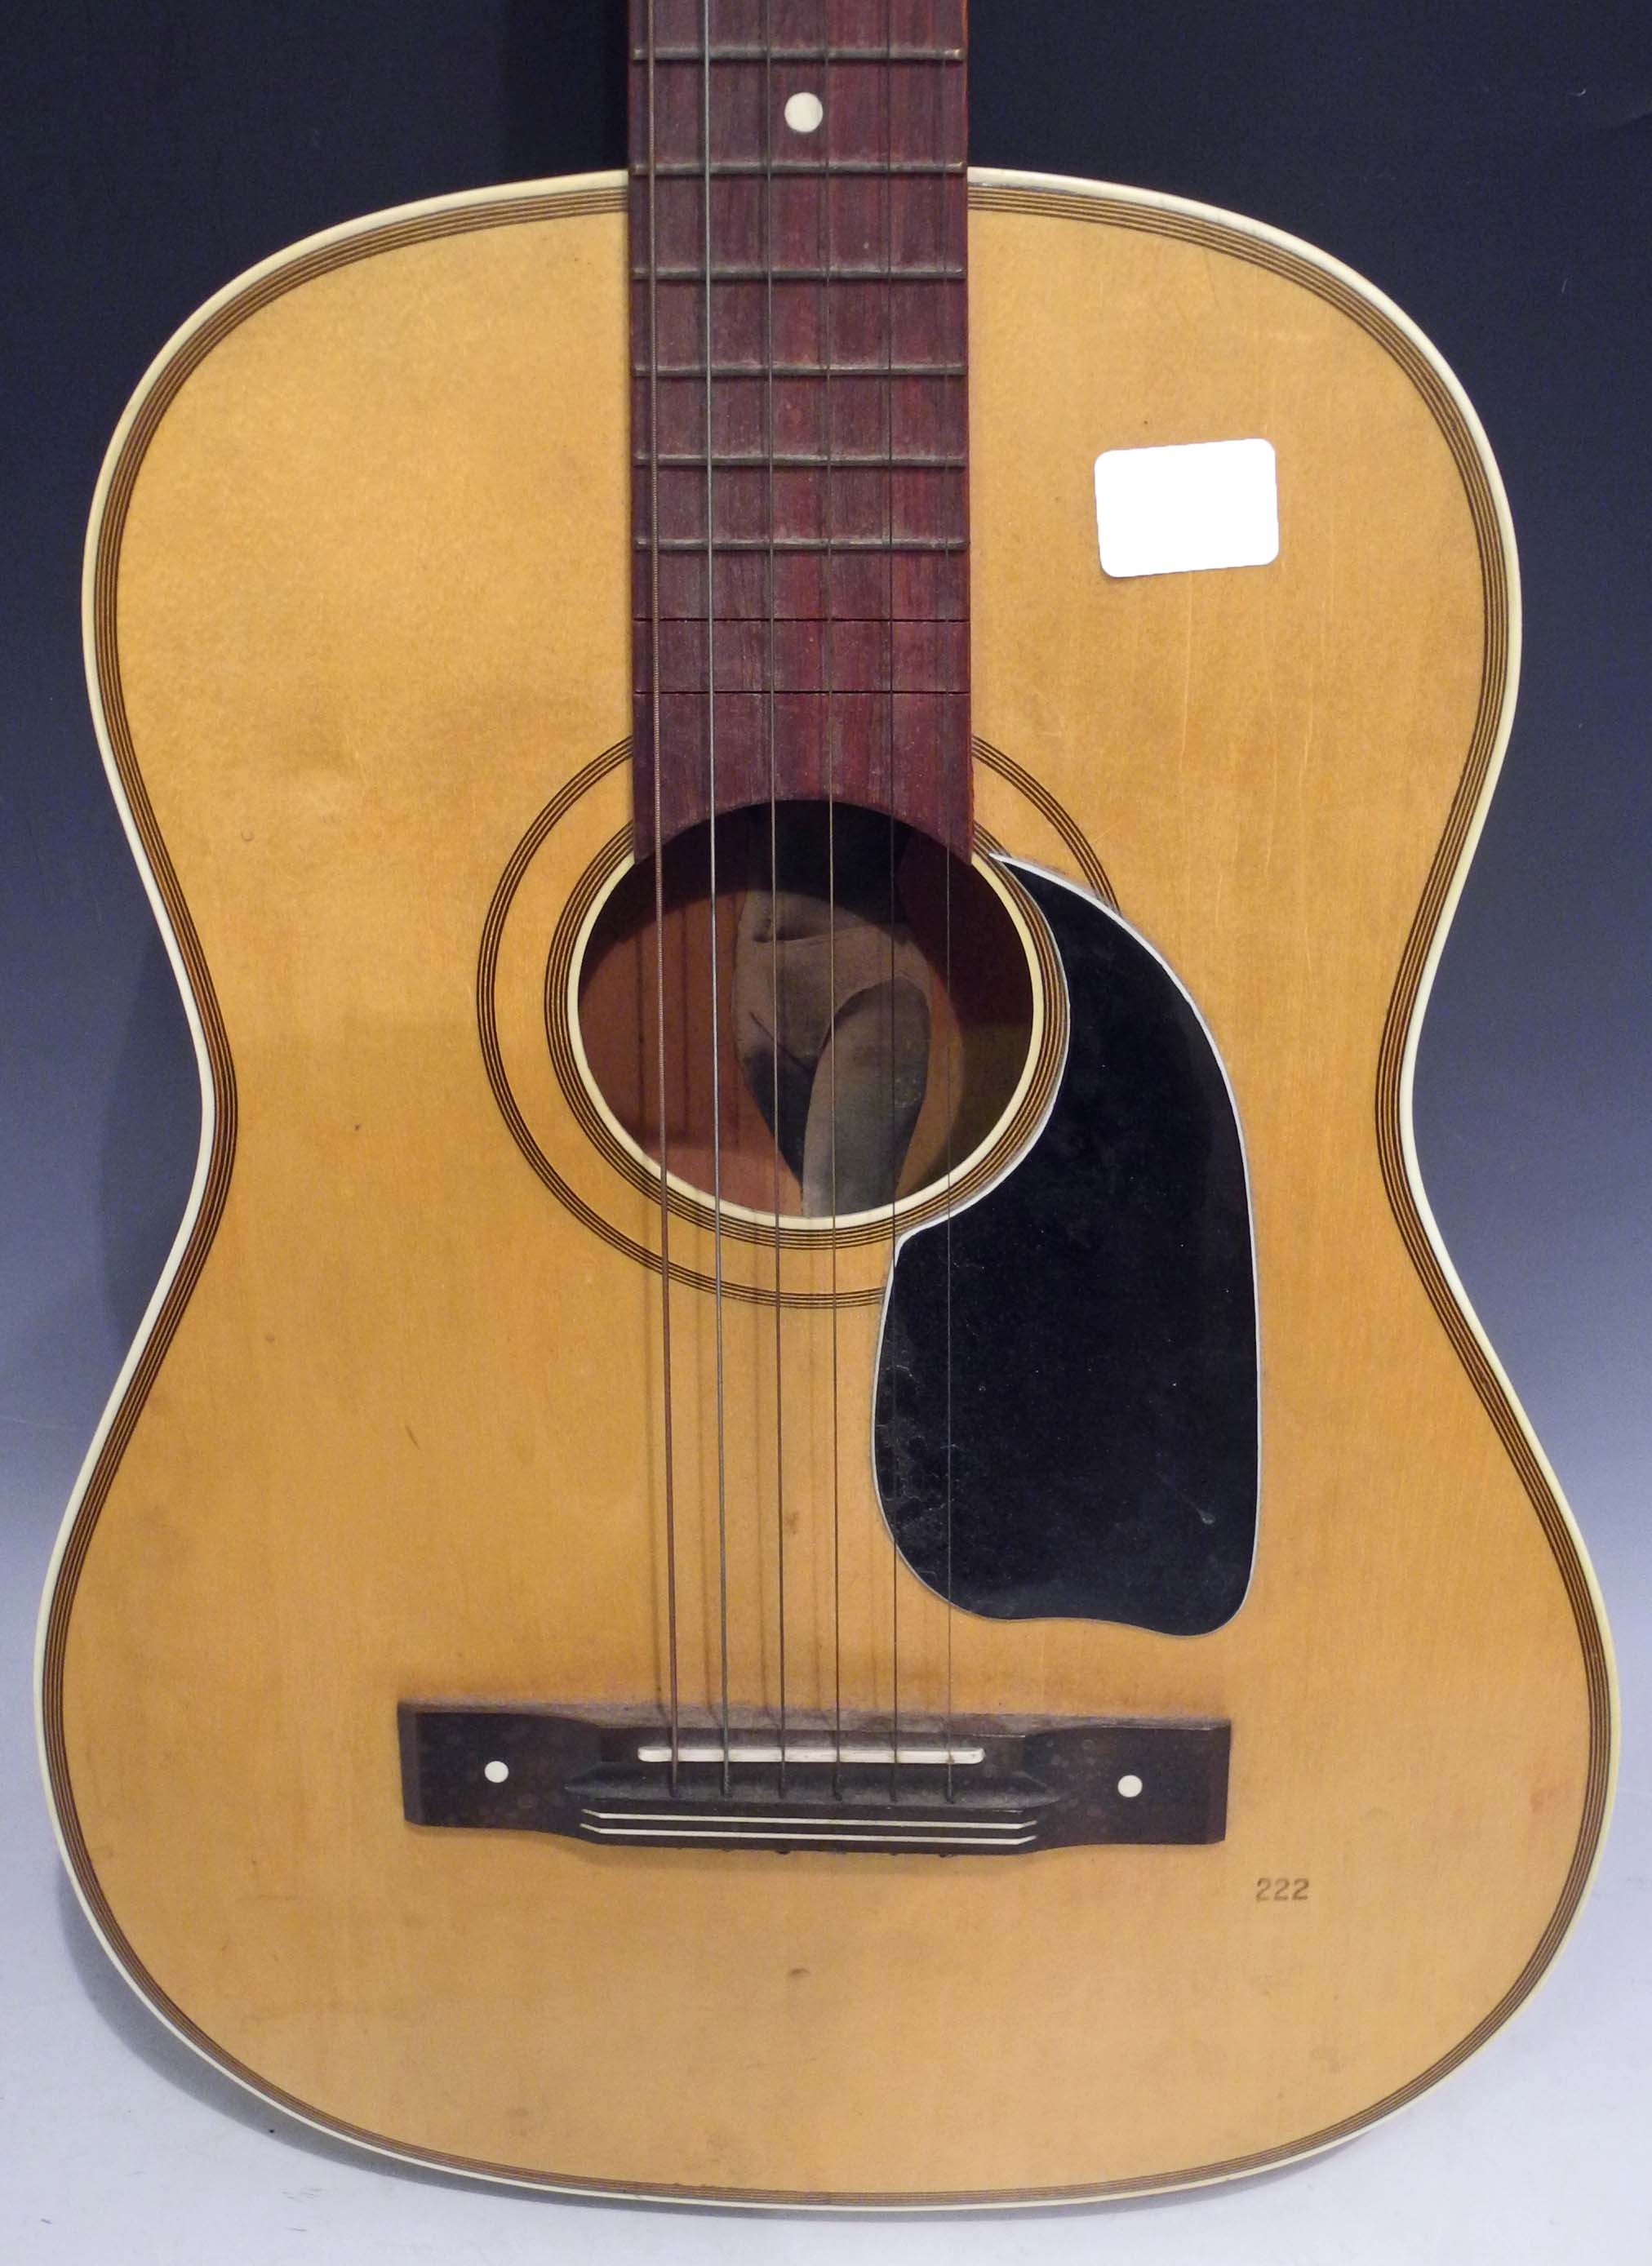 A rare Selmer Acoustic six string guitar stamped with the number 222.